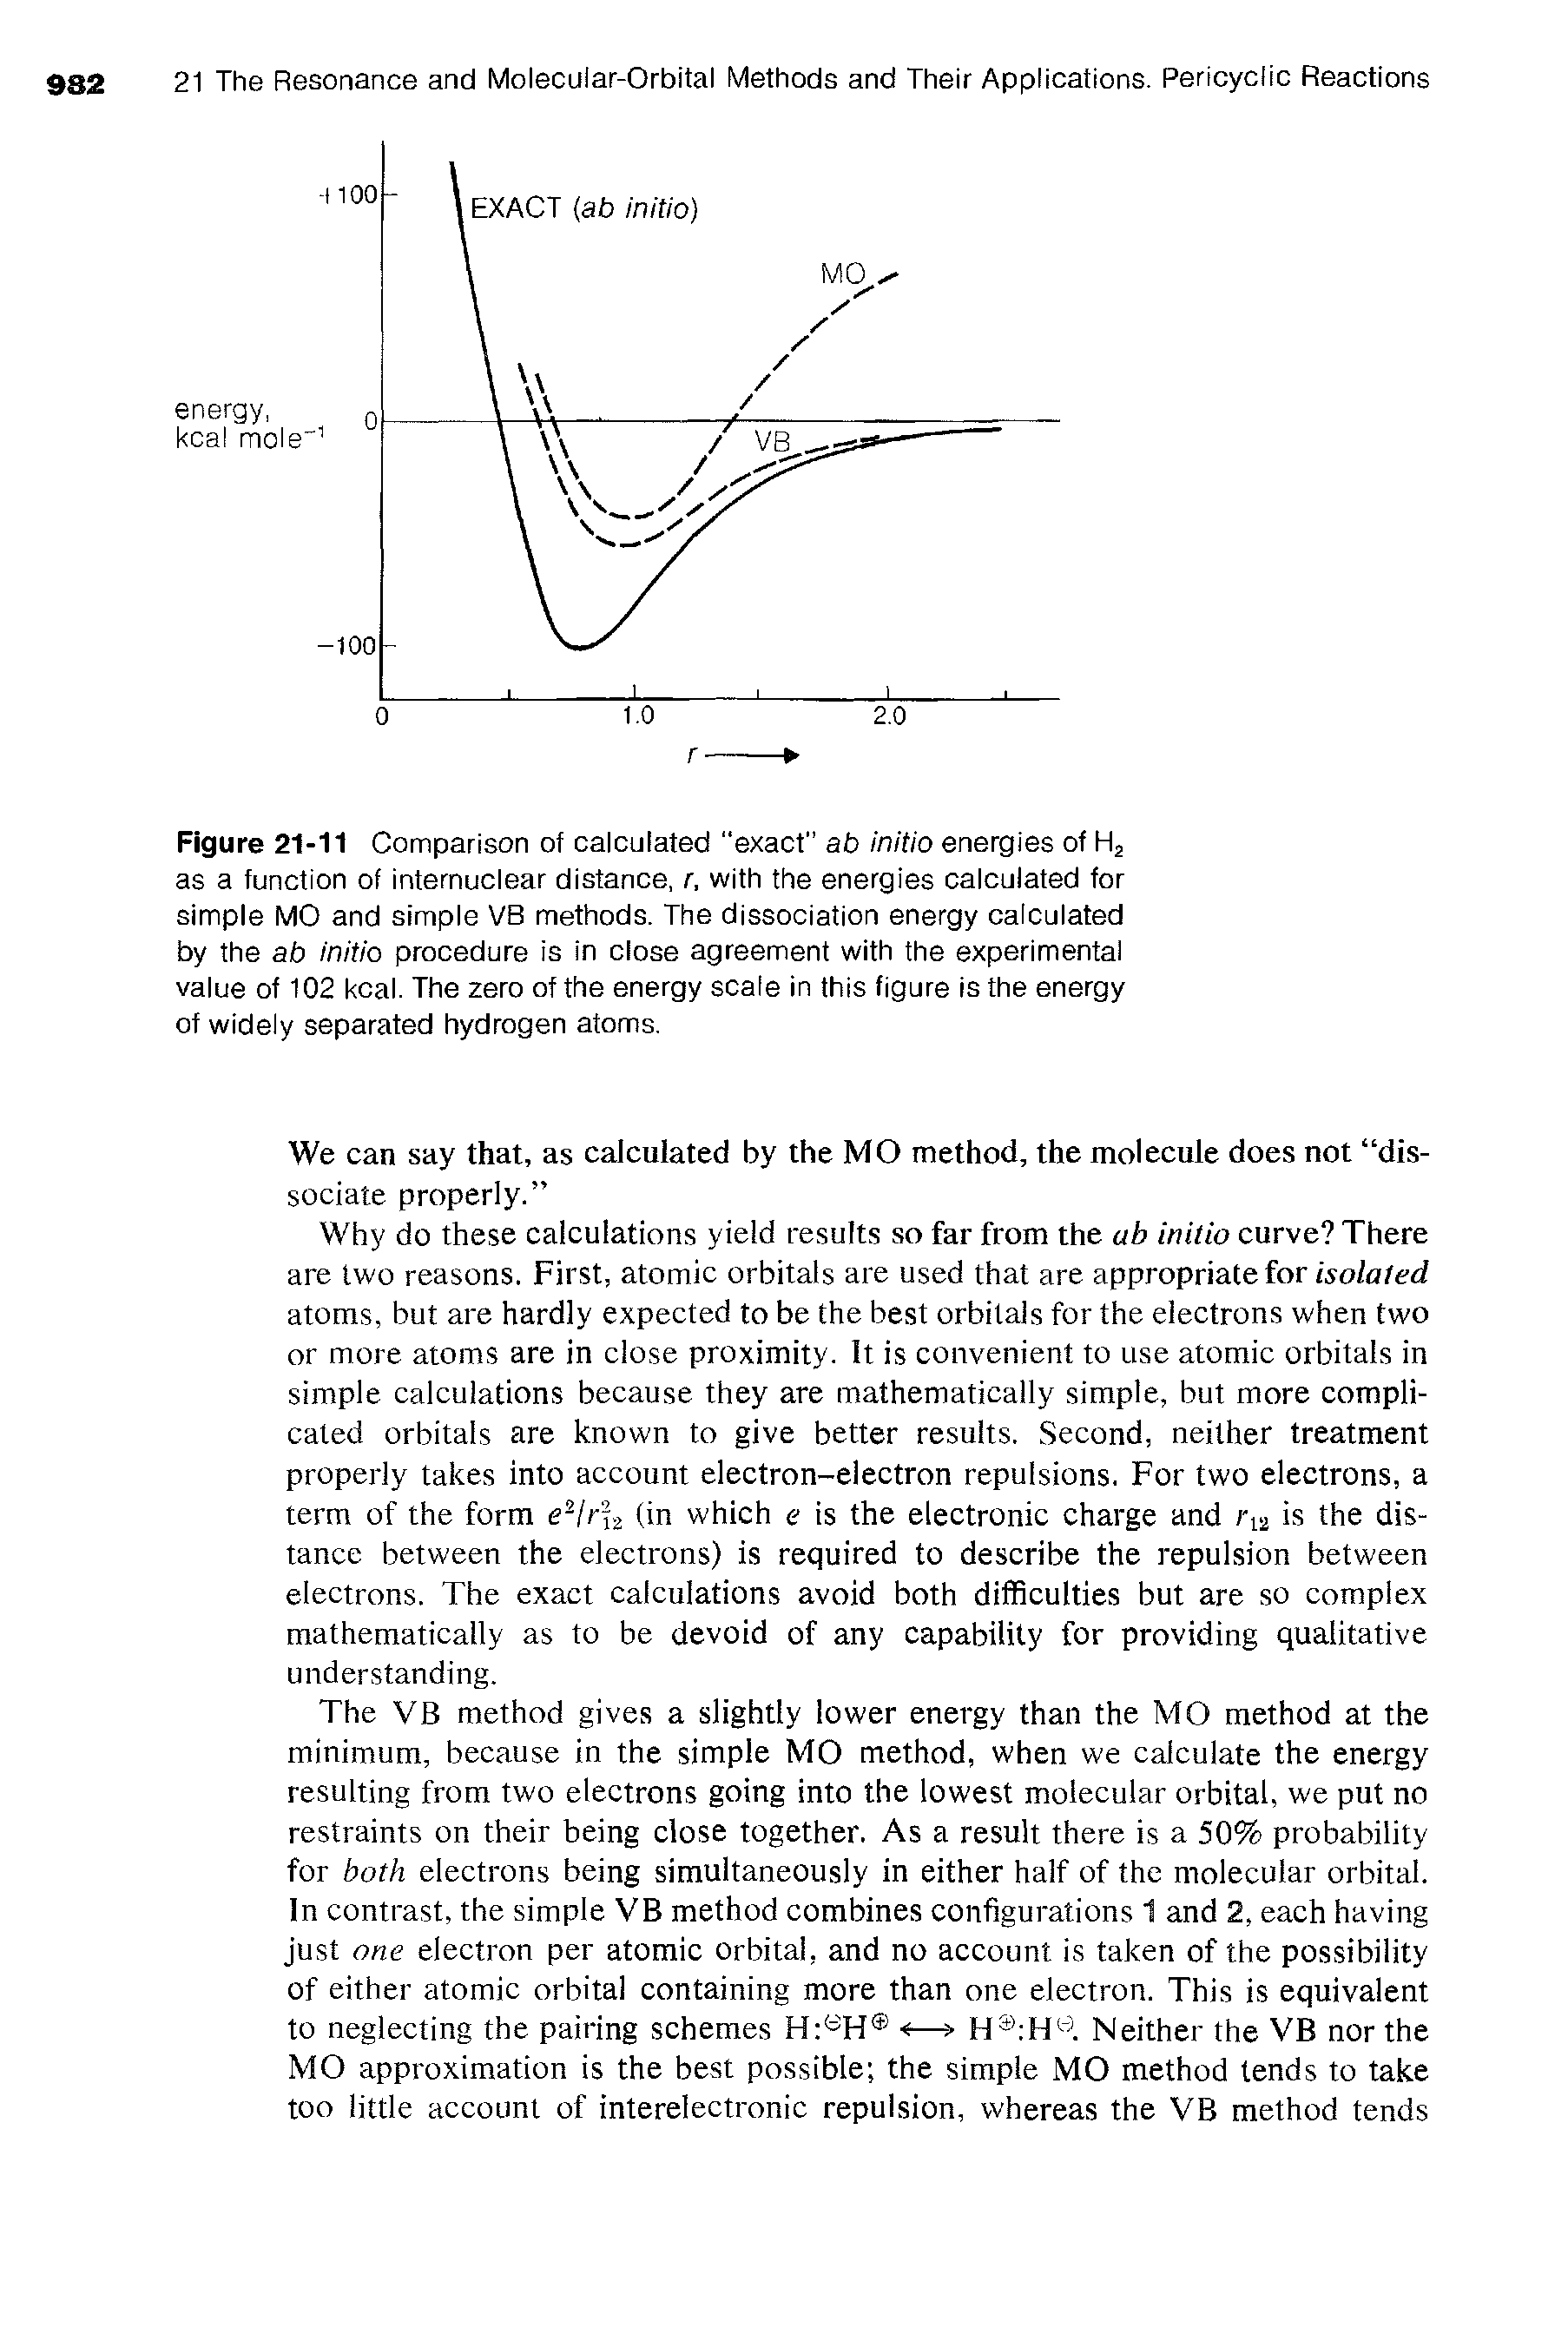 Figure 21-11 Comparison of calculated exact" ab initio energies of H2 as a function of internuclear distance, r, with the energies calculated for simple MO and simple VB methods. The dissociation energy calculated by the ab initio procedure is in close agreement with the experimental value of 102 kcal. The zero of the energy scale in this figure is the energy of widely separated hydrogen atoms.